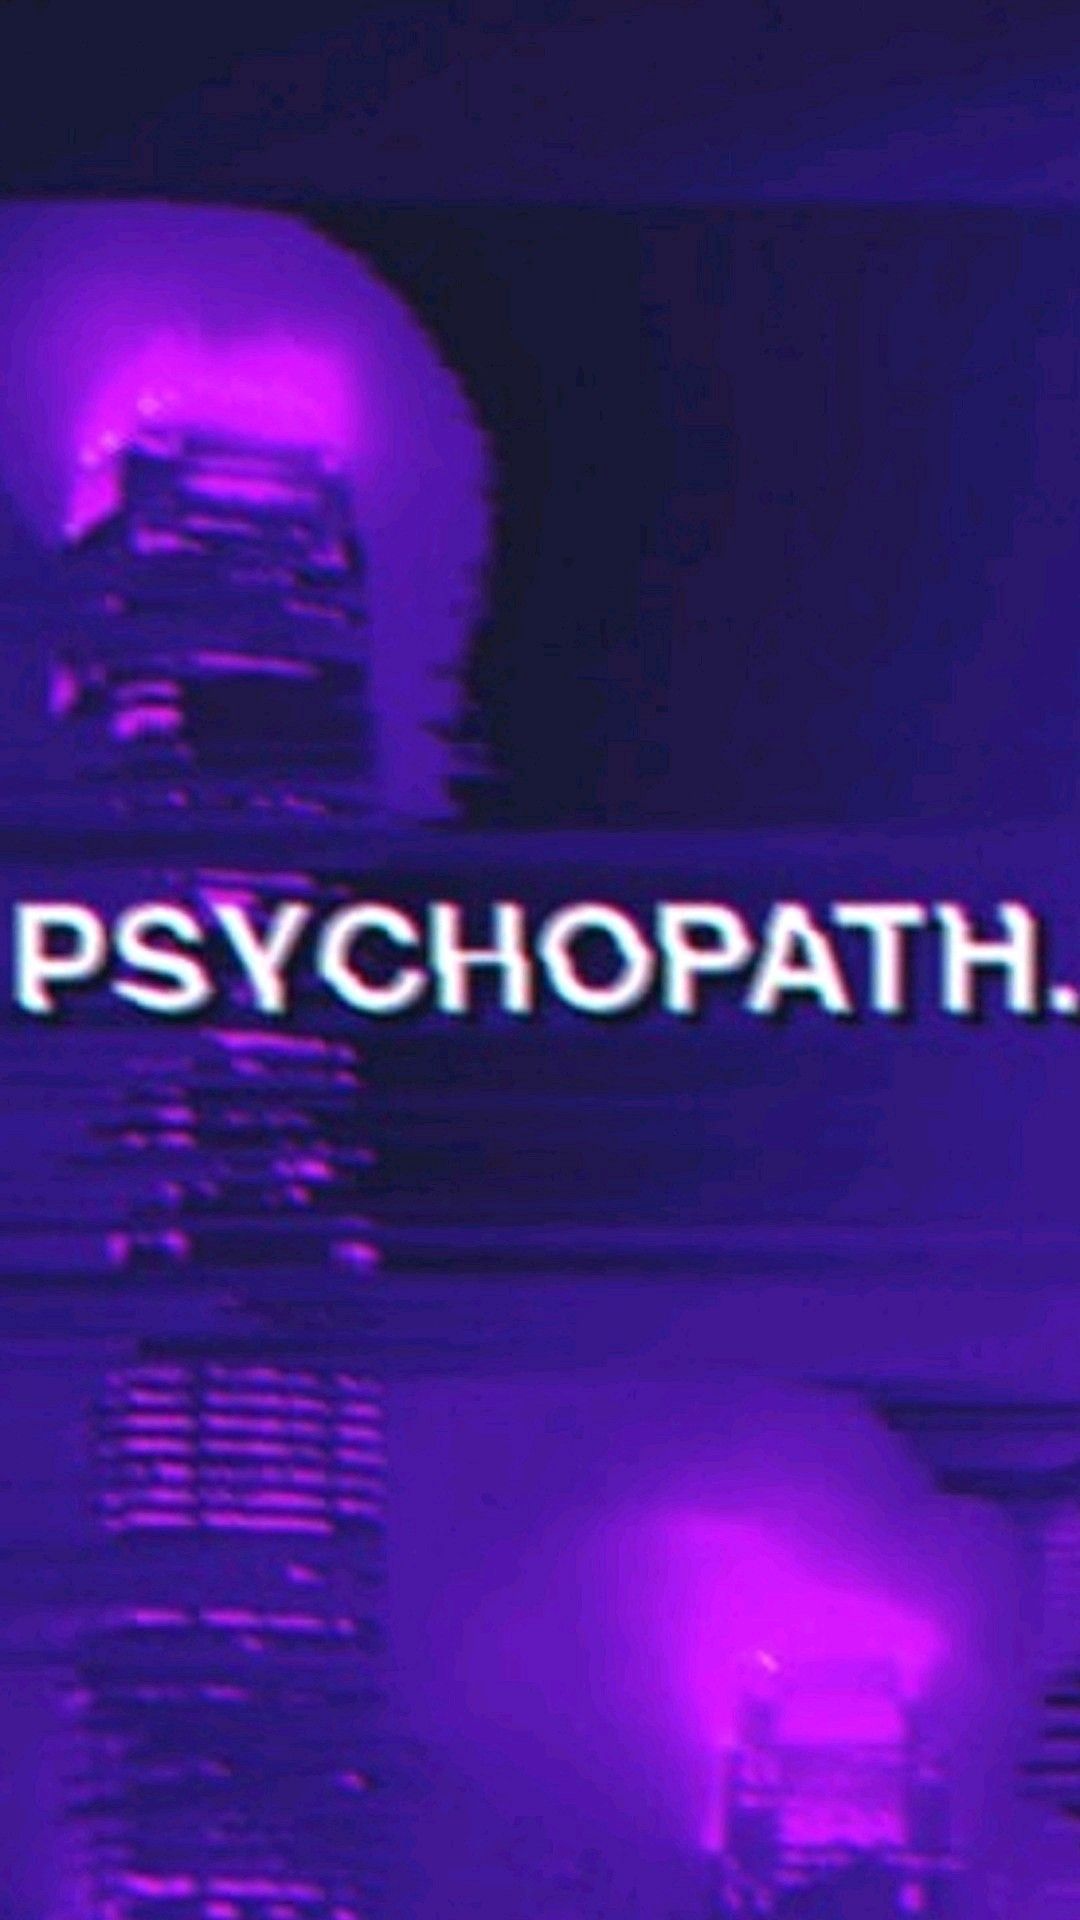 Aesthetic psychopath wallpaper for phone with high-resolution 1080x1920 pixel. You can use this wallpaper for your iPhone 5, 6, 7, 8, X, XS, XR backgrounds, Mobile Screensaver, or iPad Lock Screen - Dark purple, glitch